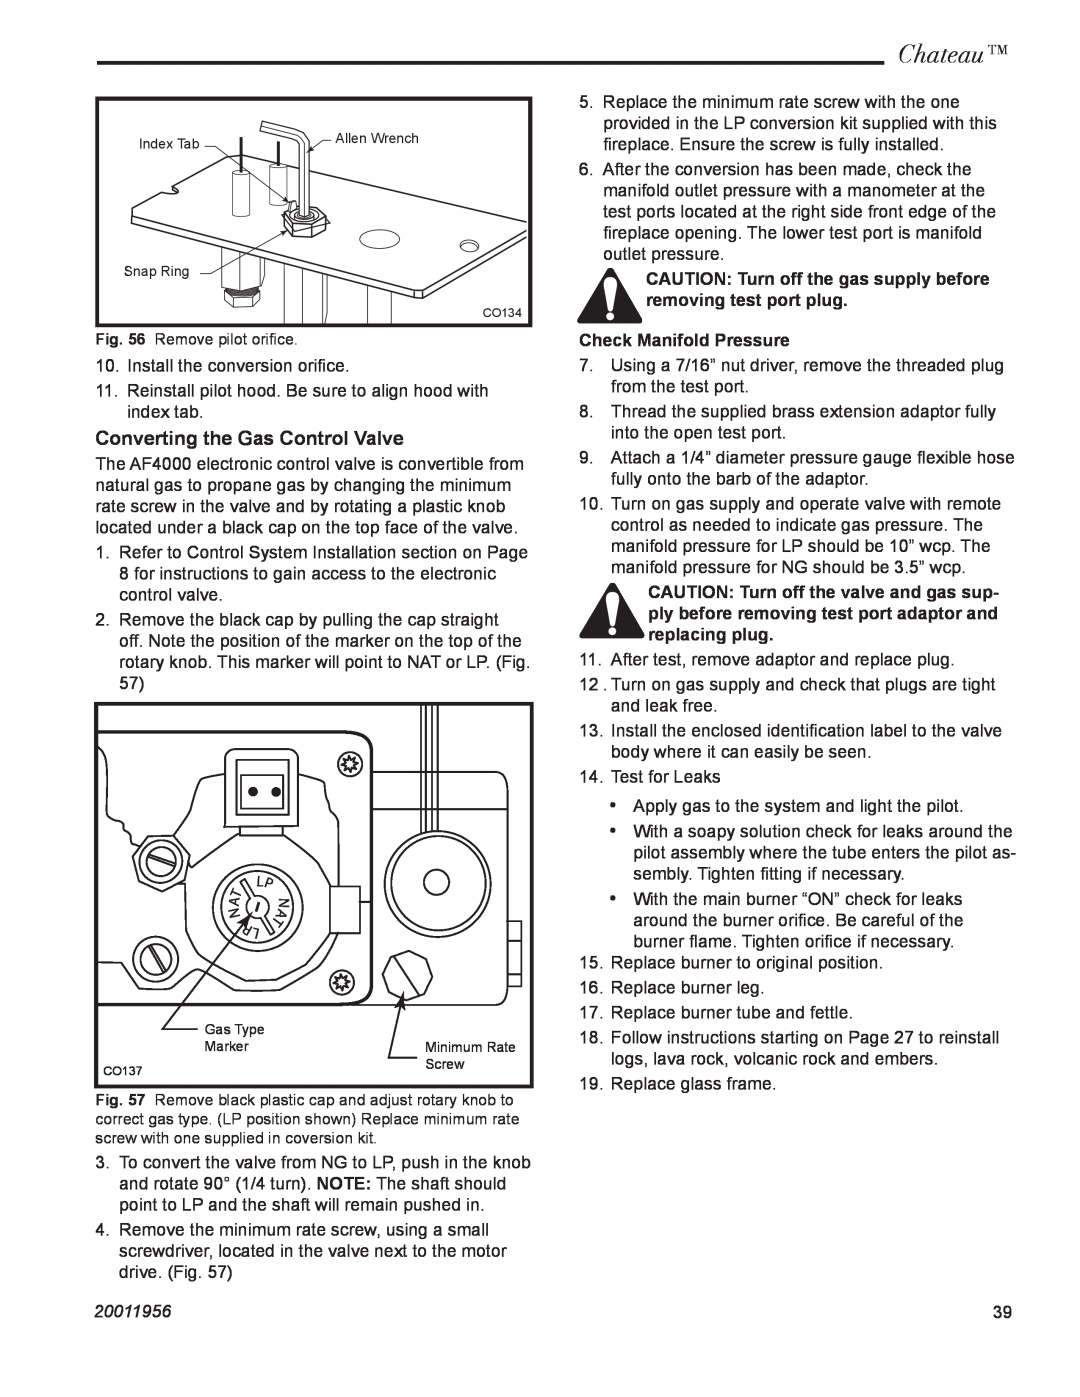 CFM Corporation DVT38IN, DVT44IN installation instructions Chateau, Converting the Gas Control Valve, 20011956 